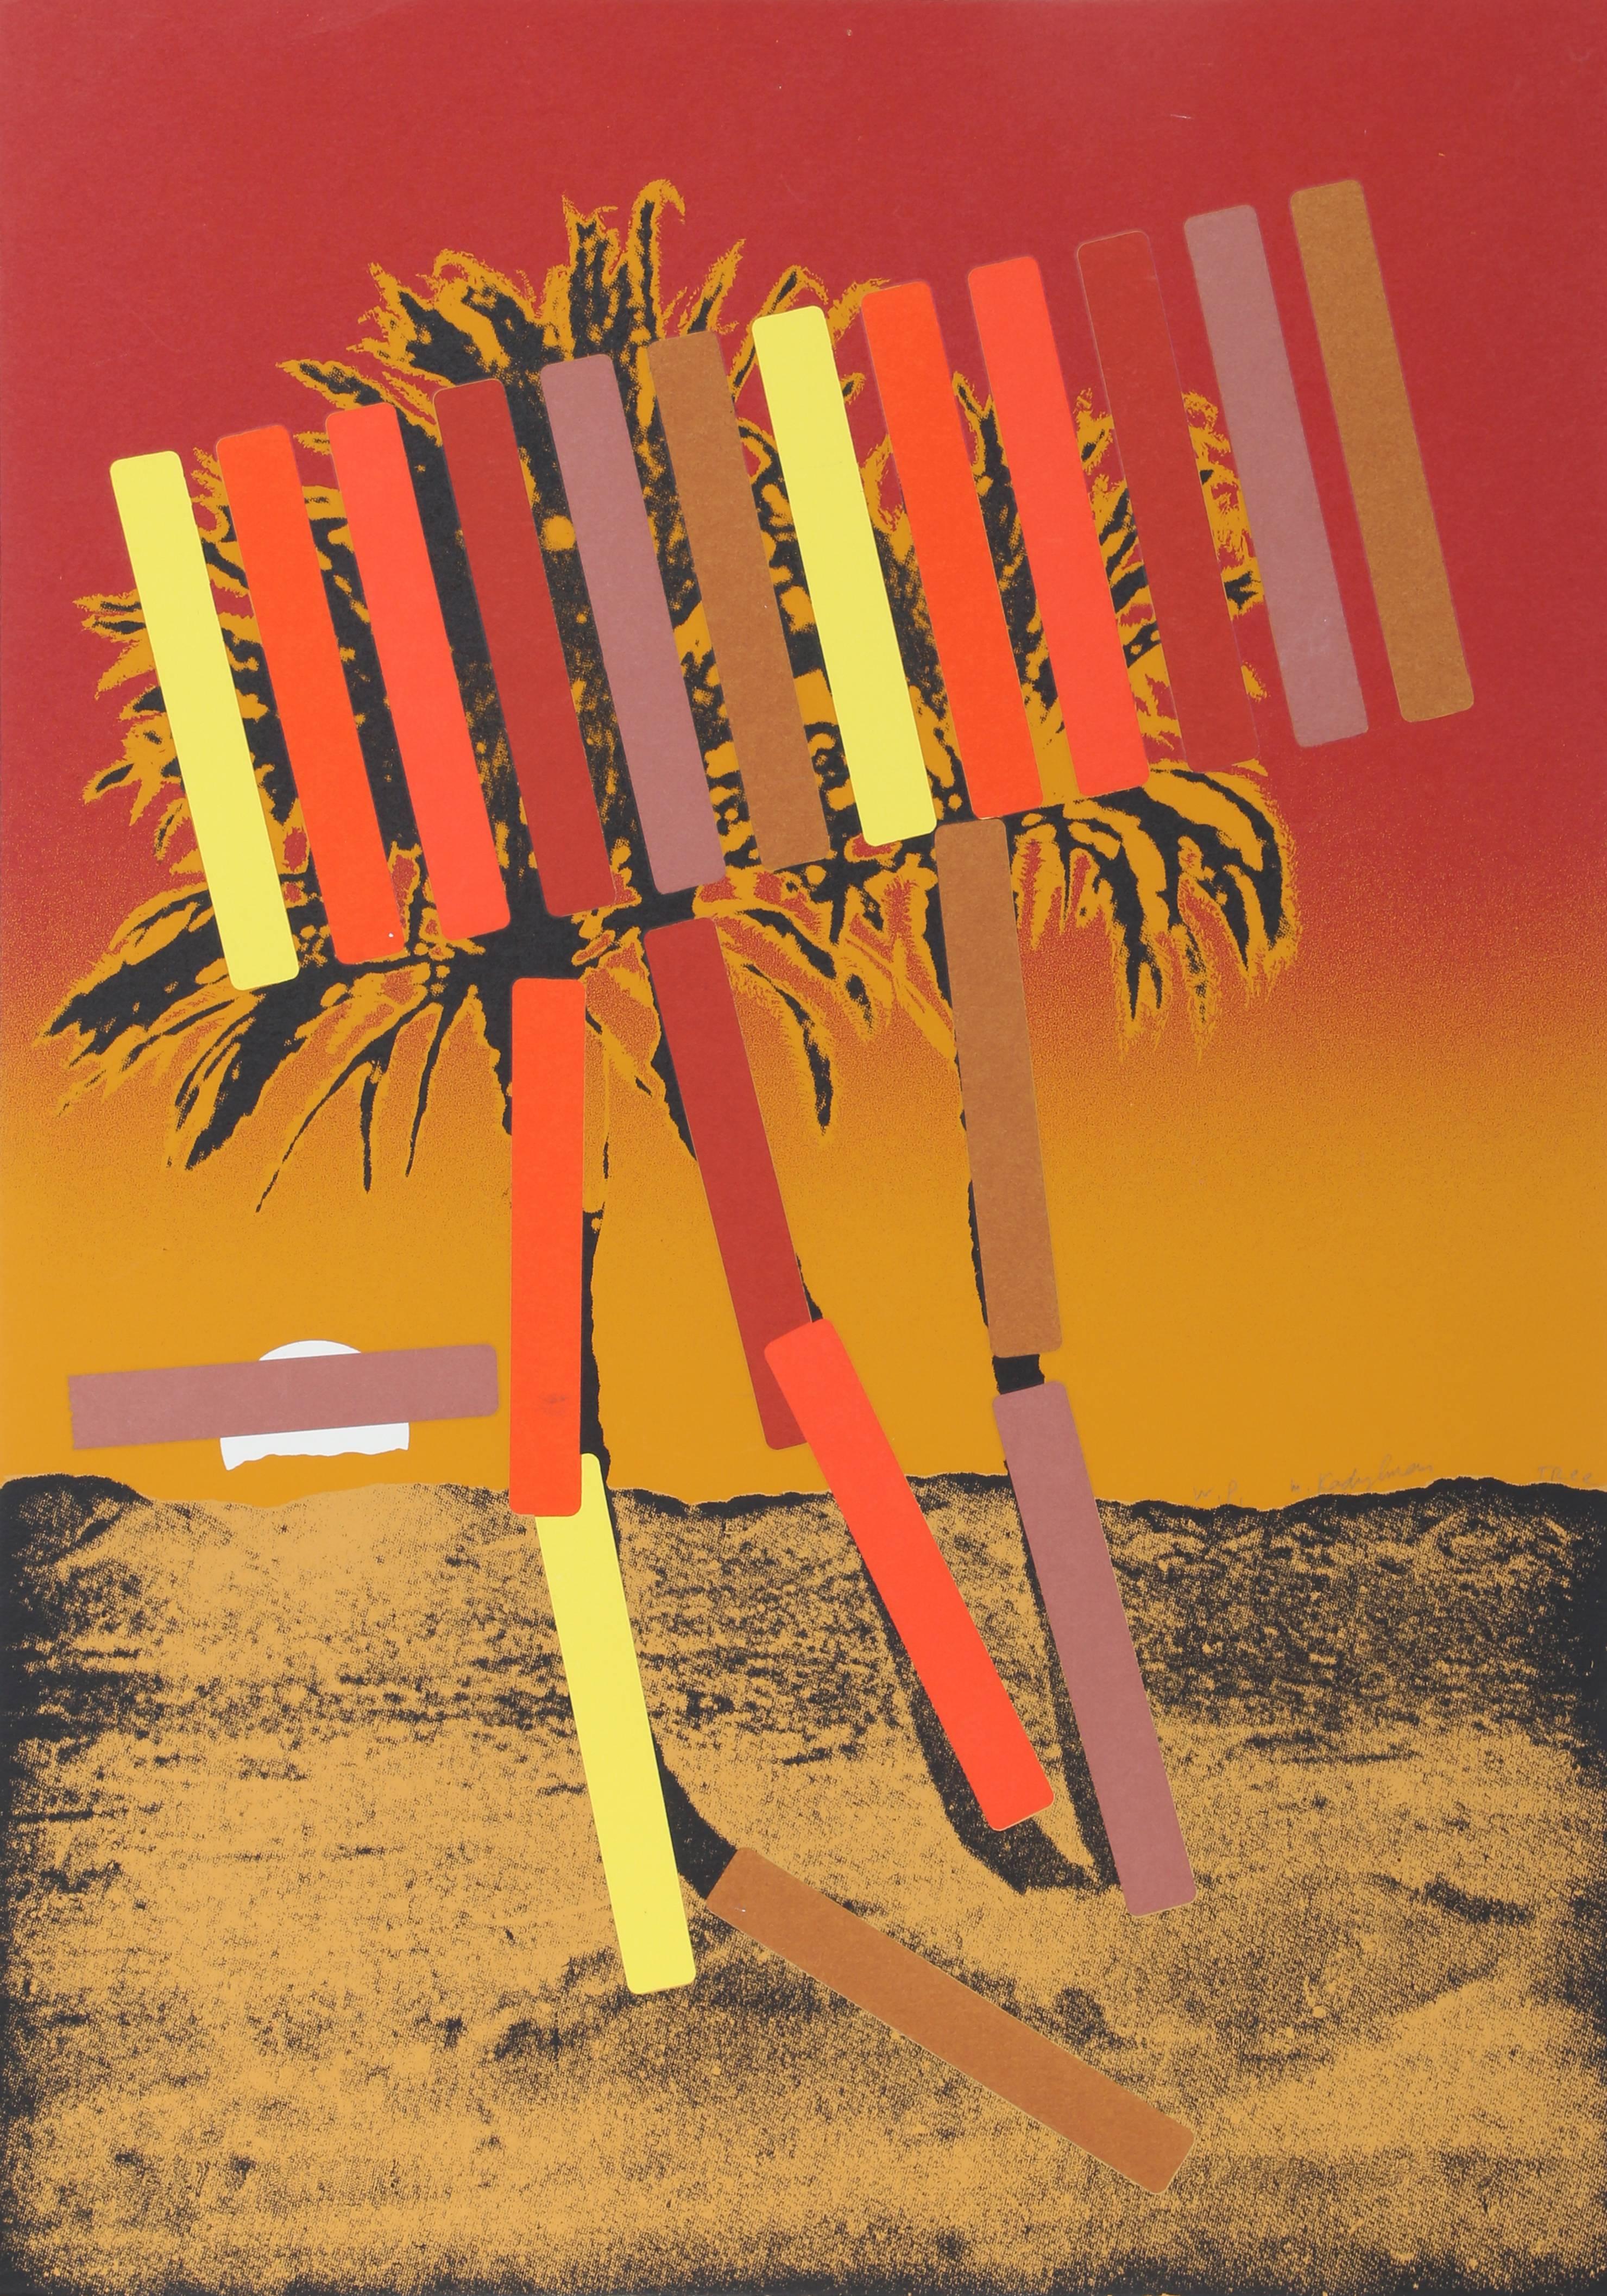 Artist: Menashe Kadishman, Israeli (1932 – 2015)
Title: Red Palm
Year: 1979
Medium: Serigraph, signed in pencil
Edition: WP (Working Proof)
Size: 30.5 x 21.5 inches

